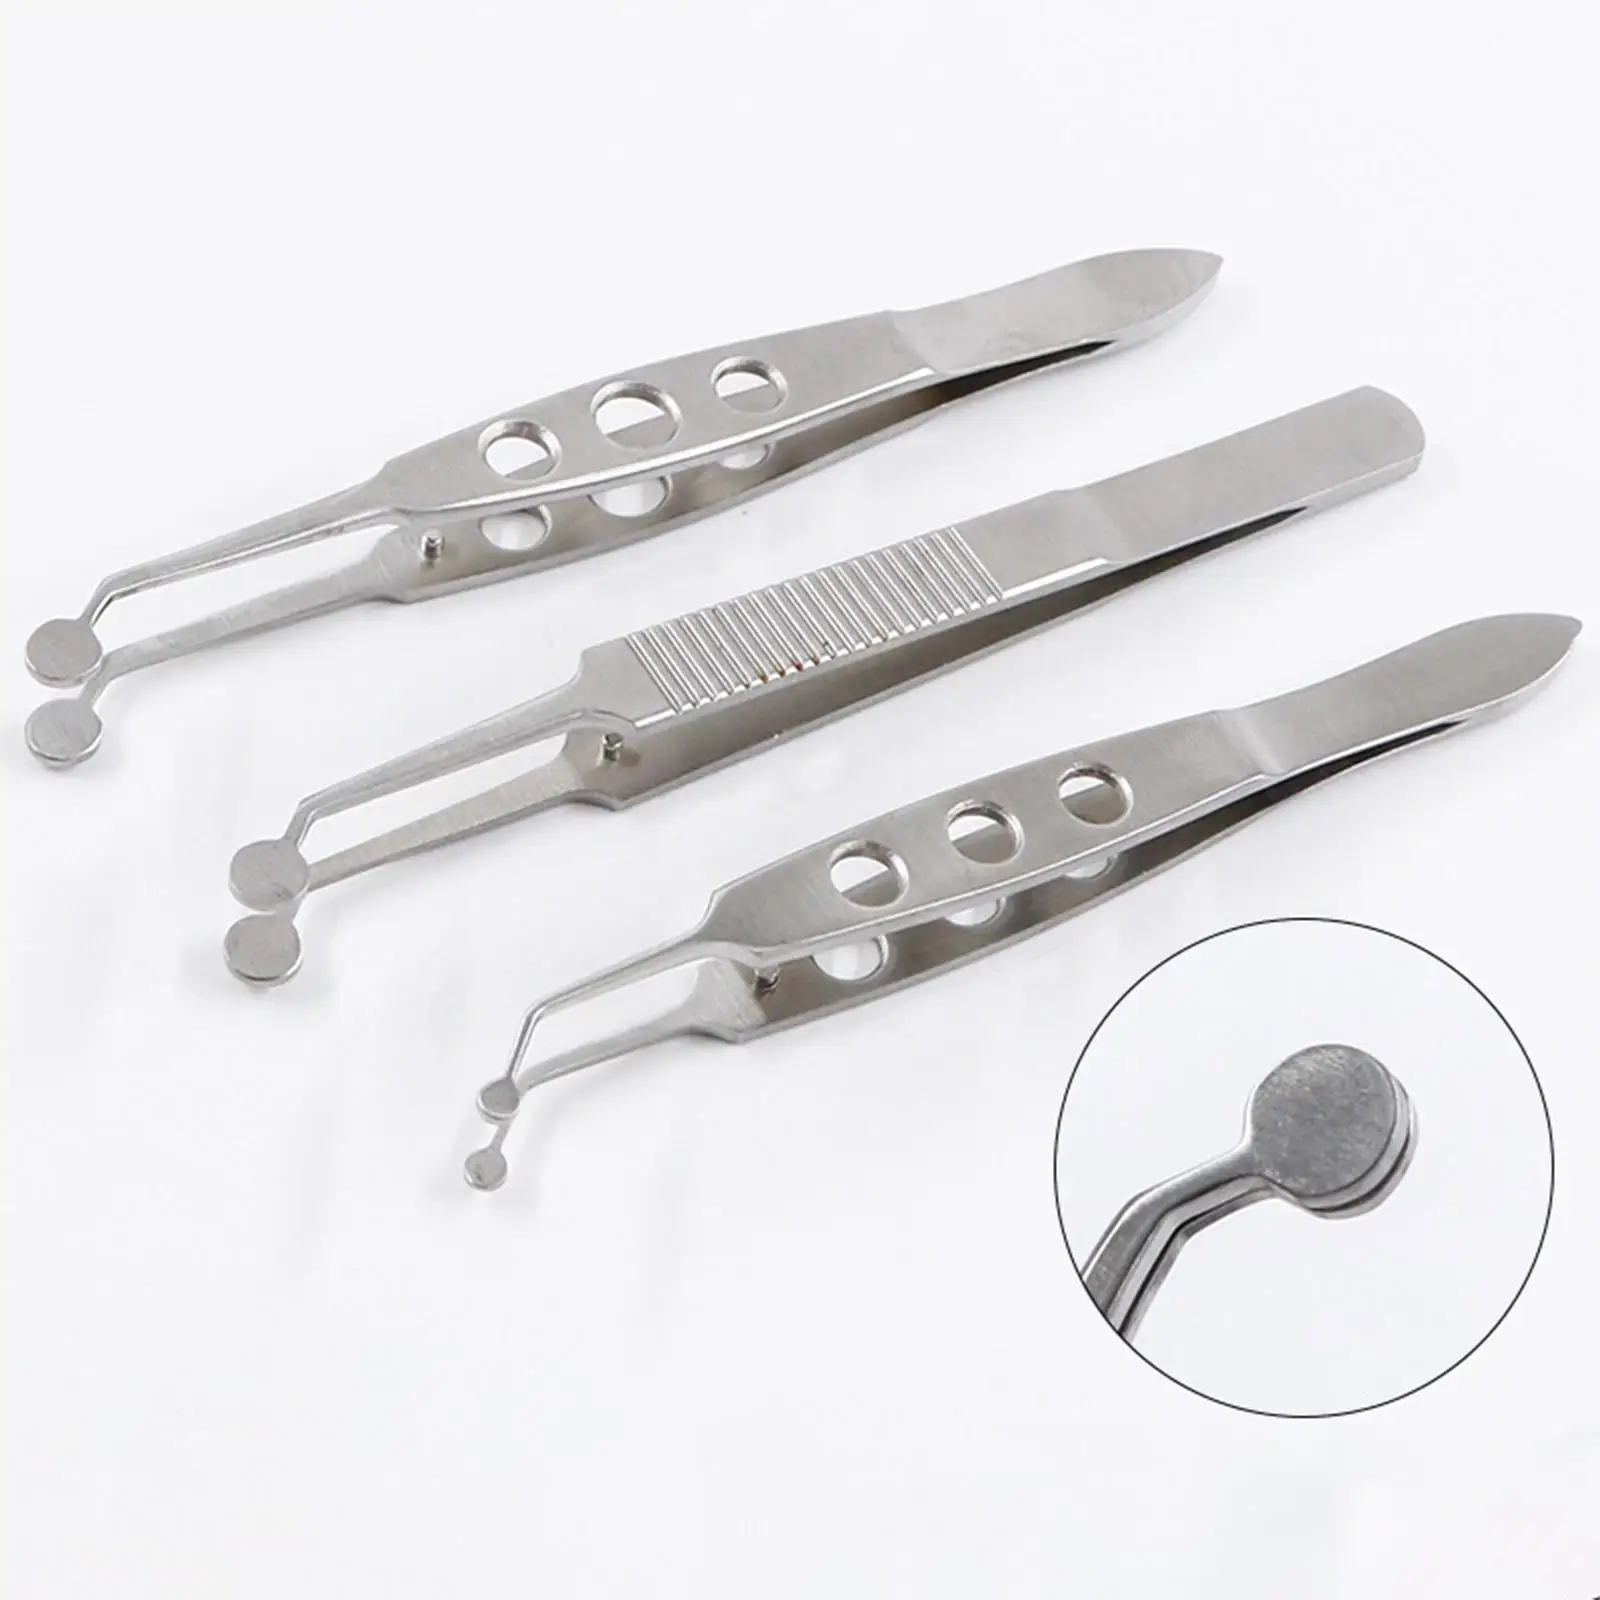 Meibomian Gland Forceps Ophthalmic Stainless Steel Eye Tool High Precision Tweezer Clip Clamp for Eyelid Meibomian Flap